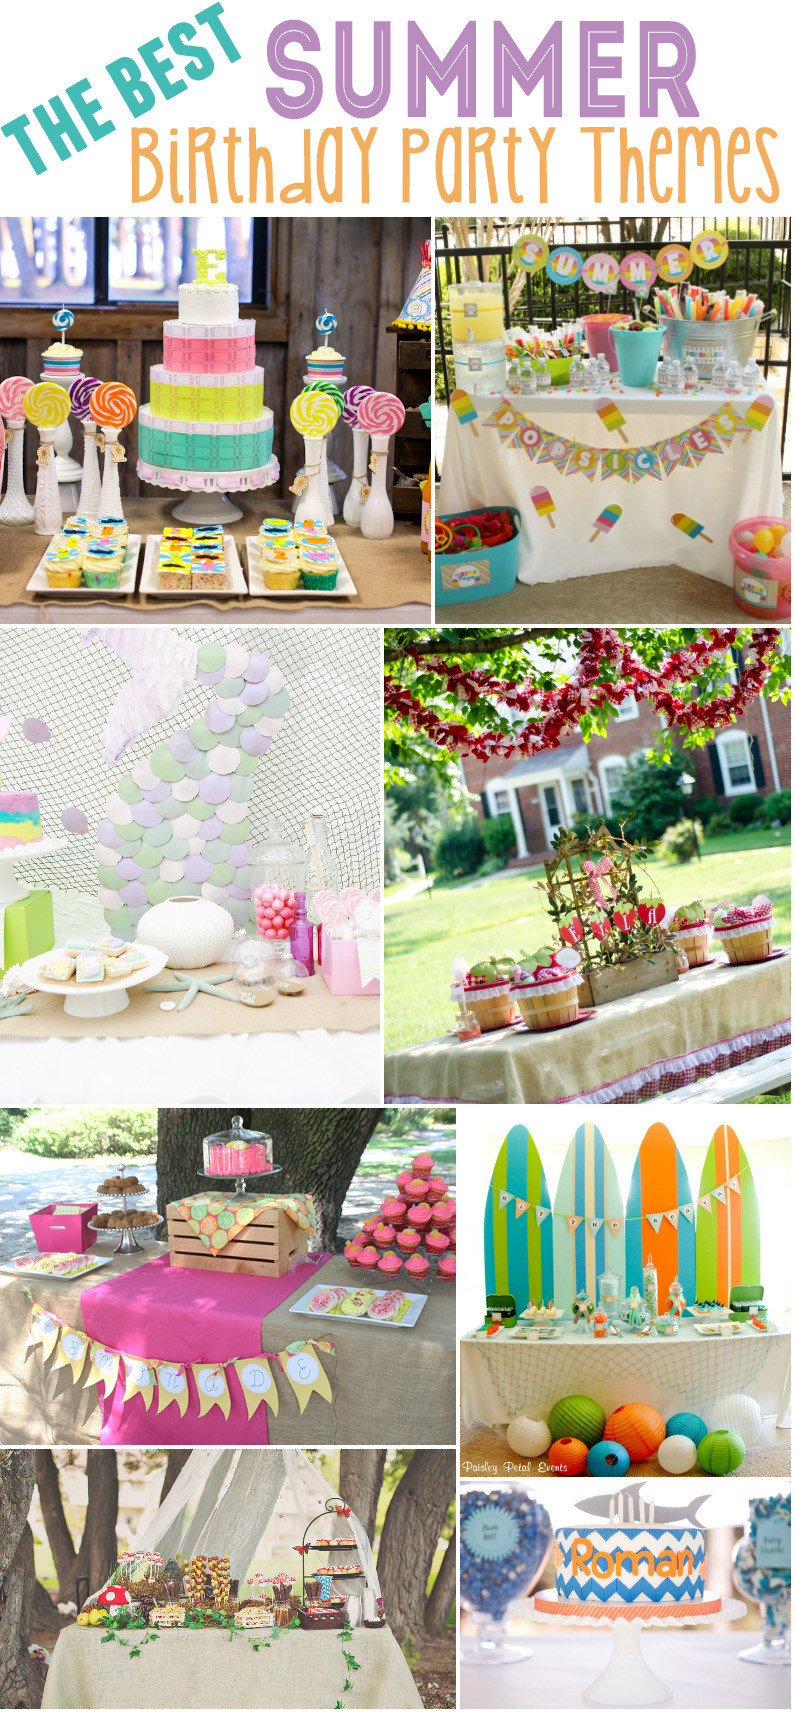 Summer Bday Party Ideas
 15 Best Summer Birthday Party Themes Design Dazzle